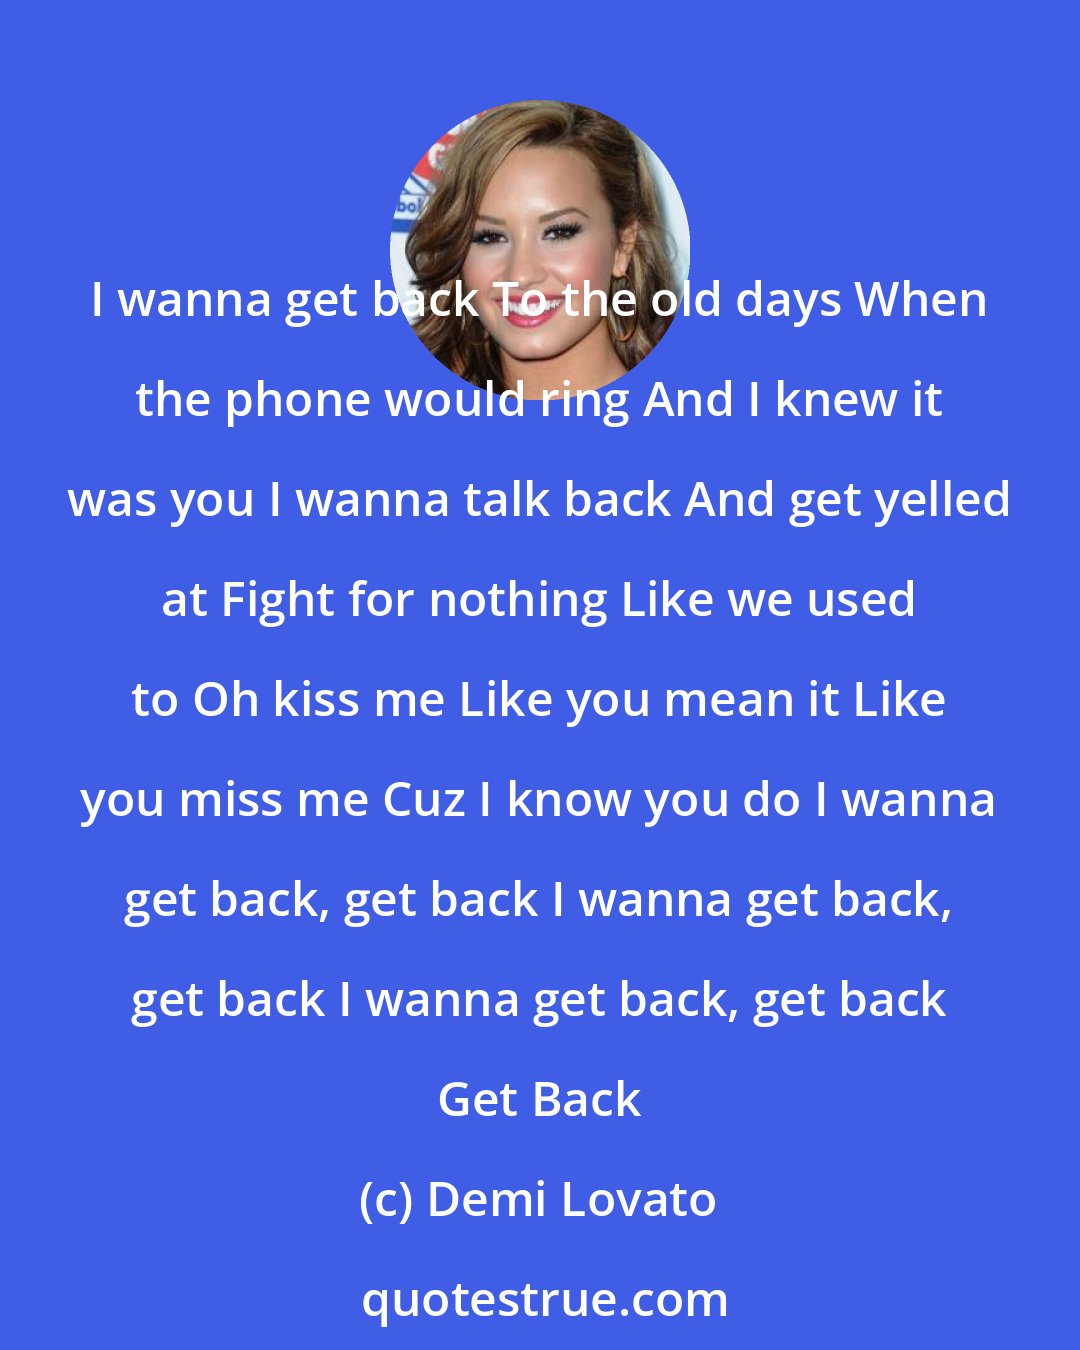 Demi Lovato: I wanna get back To the old days When the phone would ring And I knew it was you I wanna talk back And get yelled at Fight for nothing Like we used to Oh kiss me Like you mean it Like you miss me Cuz I know you do I wanna get back, get back I wanna get back, get back I wanna get back, get back Get Back